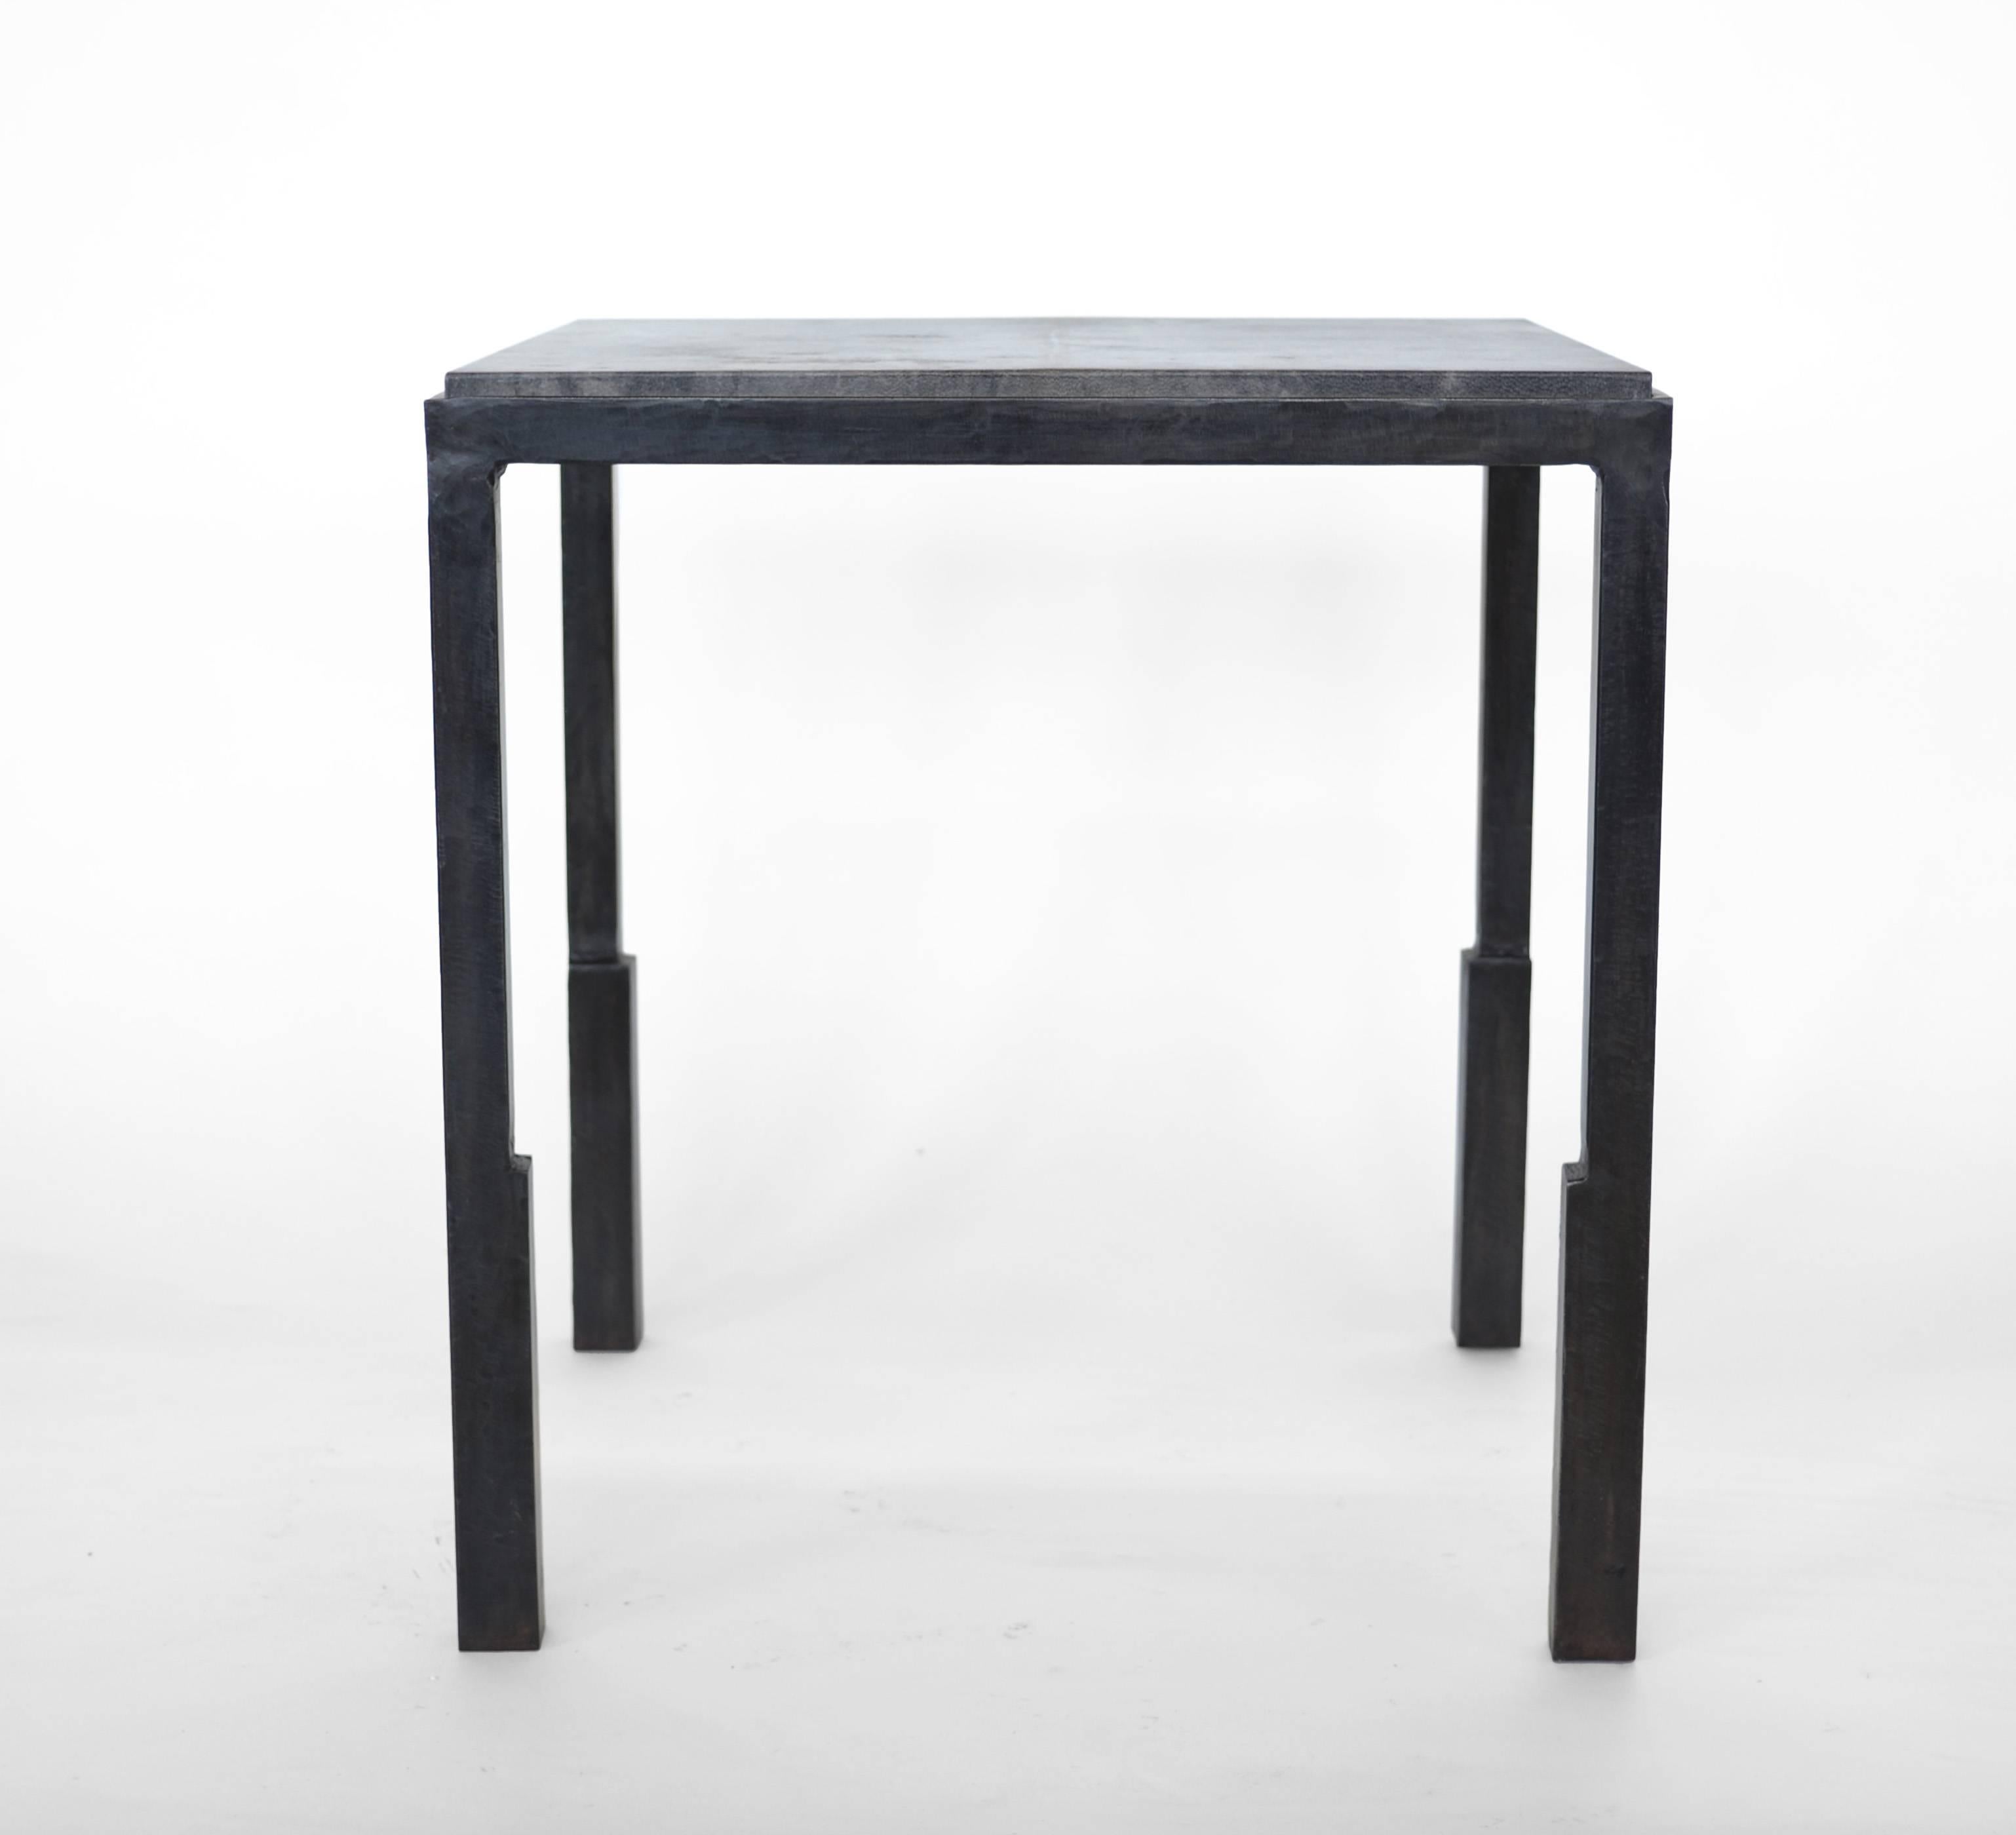 Carved Parchment Side Table Modern Geometric Stark Thick Handmade Blackened Steel Waxed